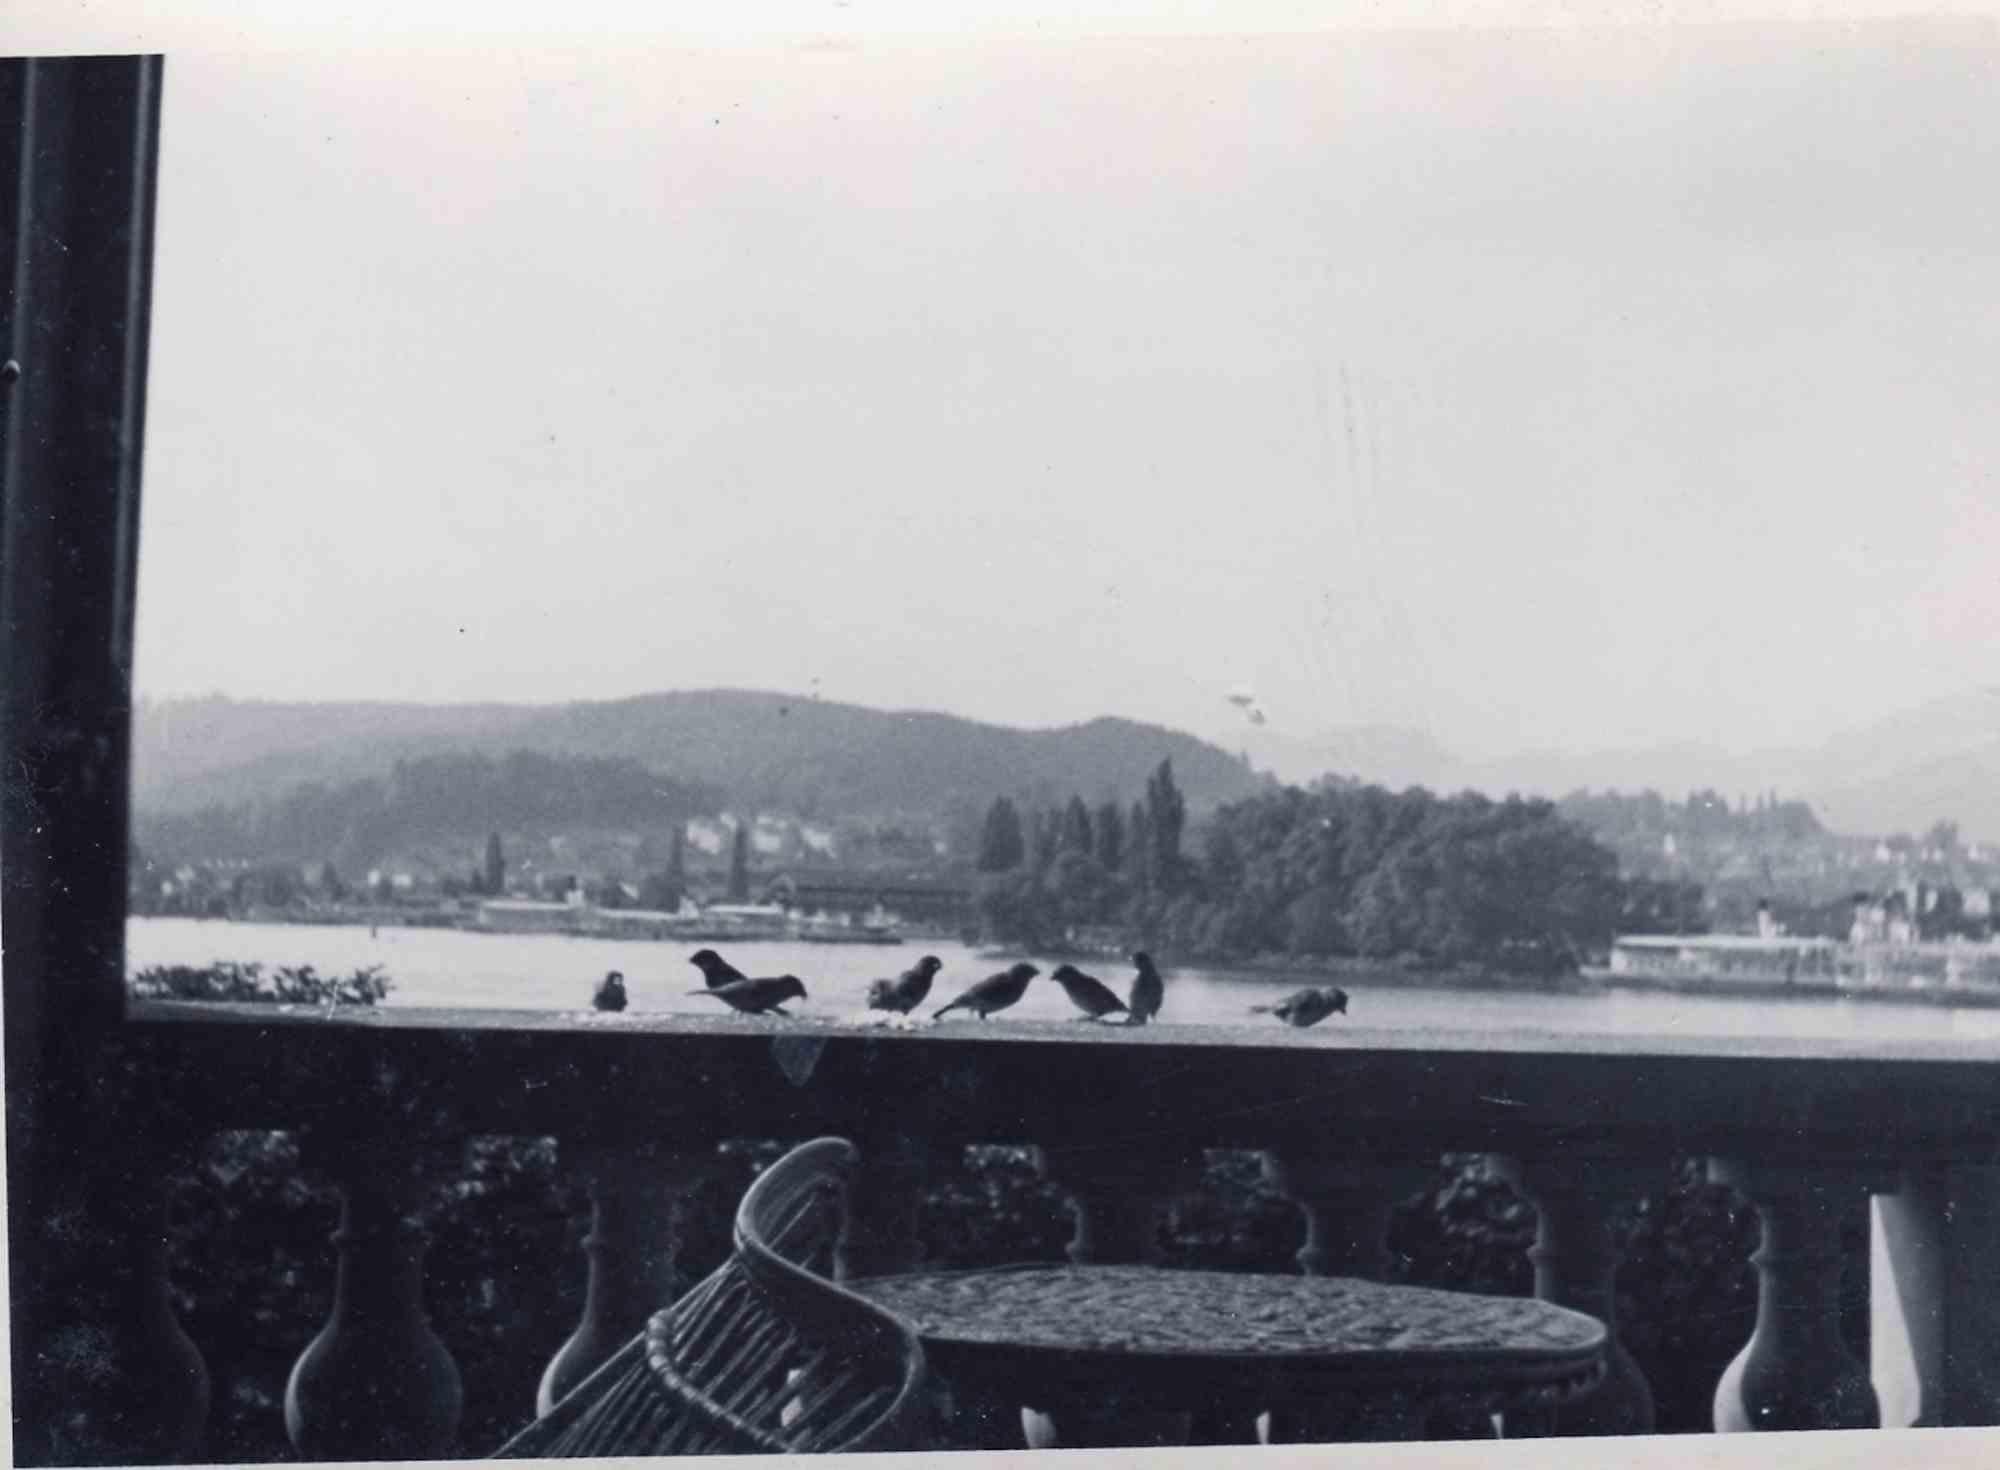 Unknown Figurative Photograph - Old days Photo - Morning Birds - Vintage Photo - Early 20th century